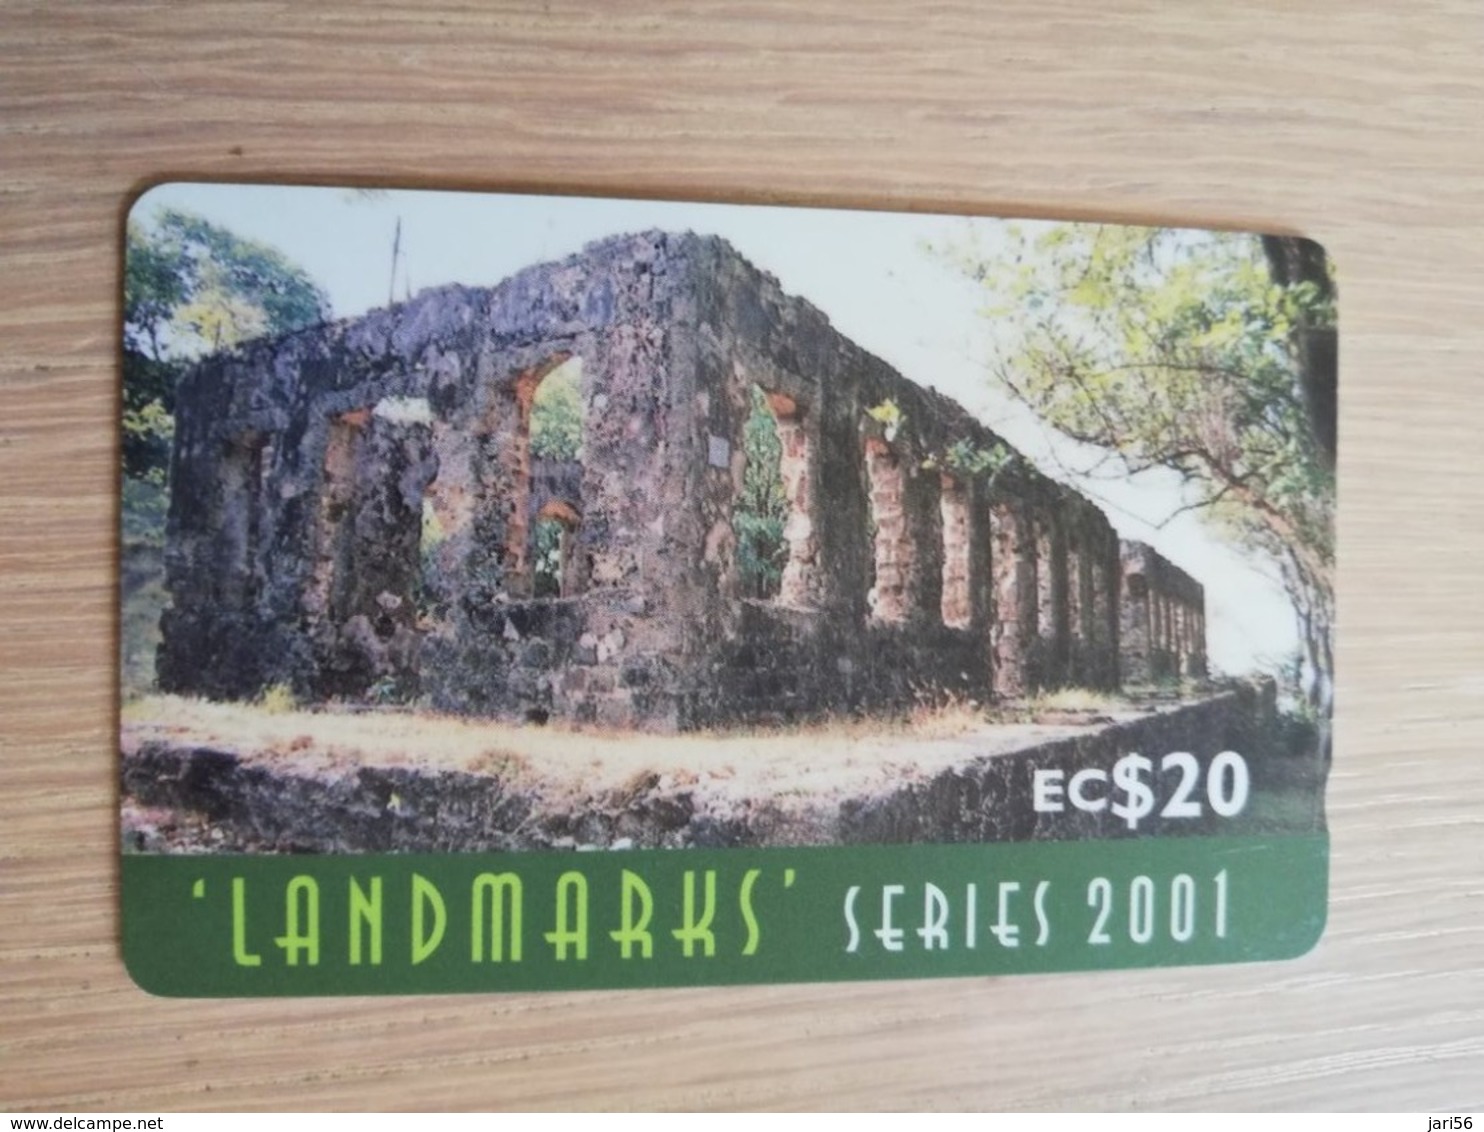 ST LUCIA    $ 20   CABLE & WIRELESS  STL-337F   337CSLF  LANDMARKS SERIES       Fine Used Card ** 2757** - Santa Lucia